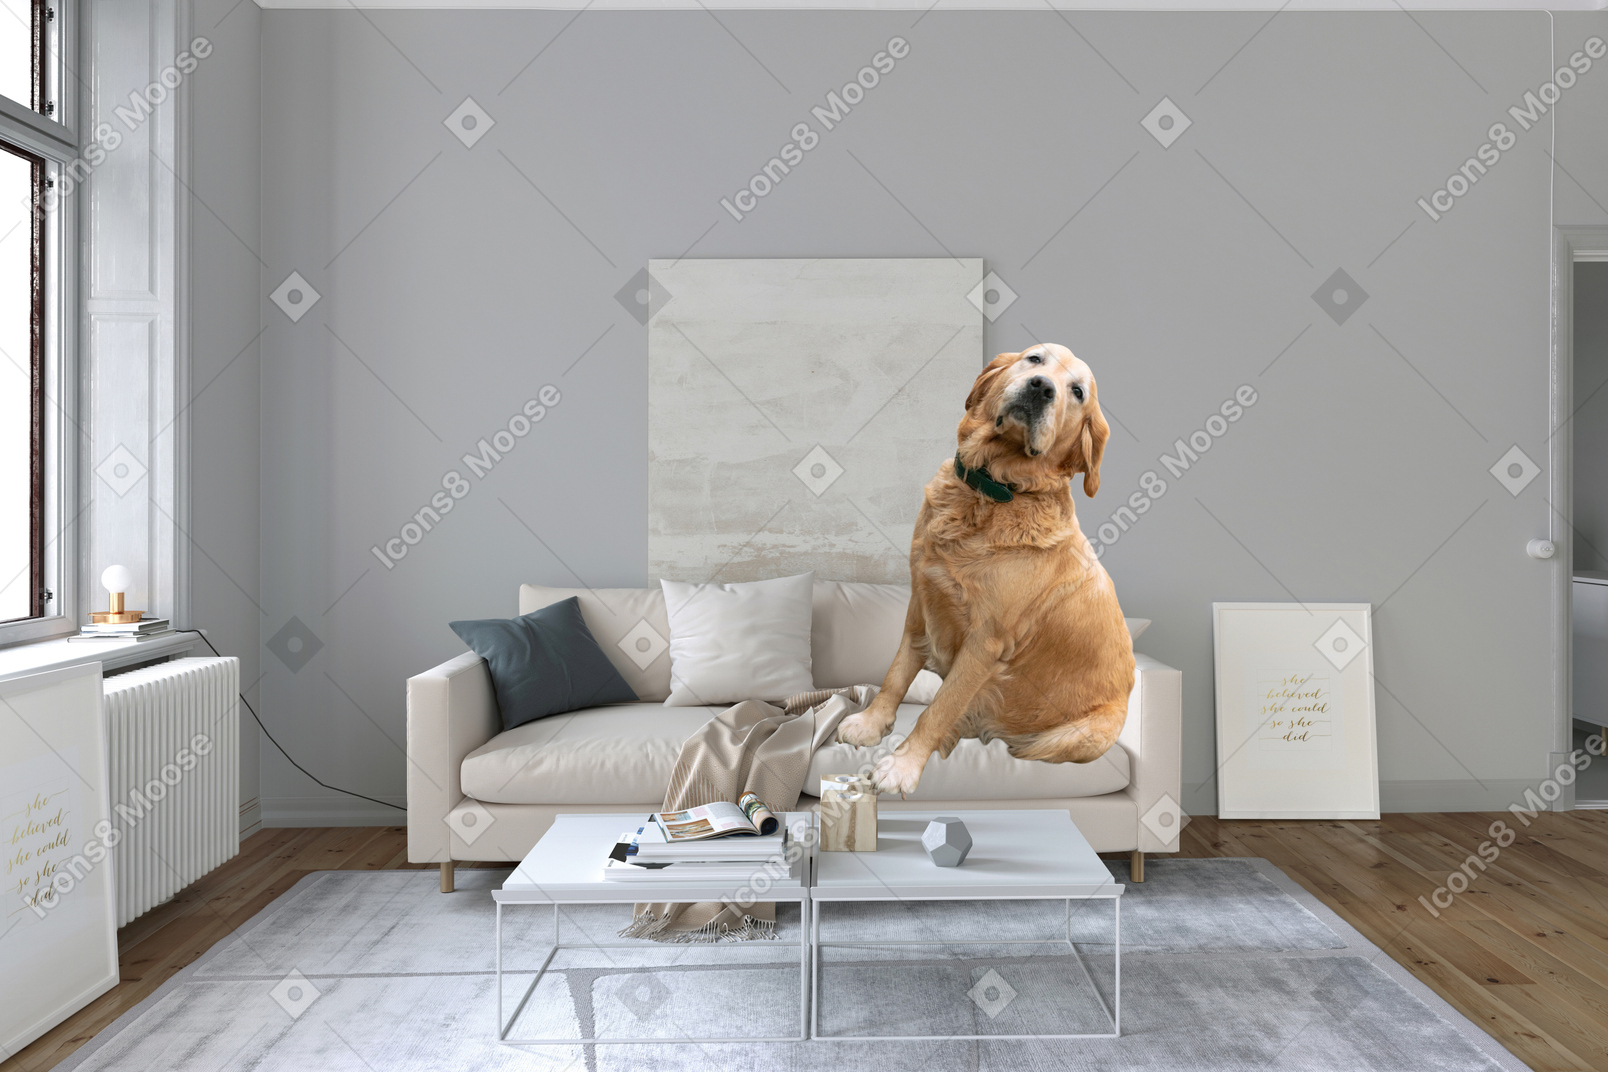 A dog sitting on top of a couch in a living room